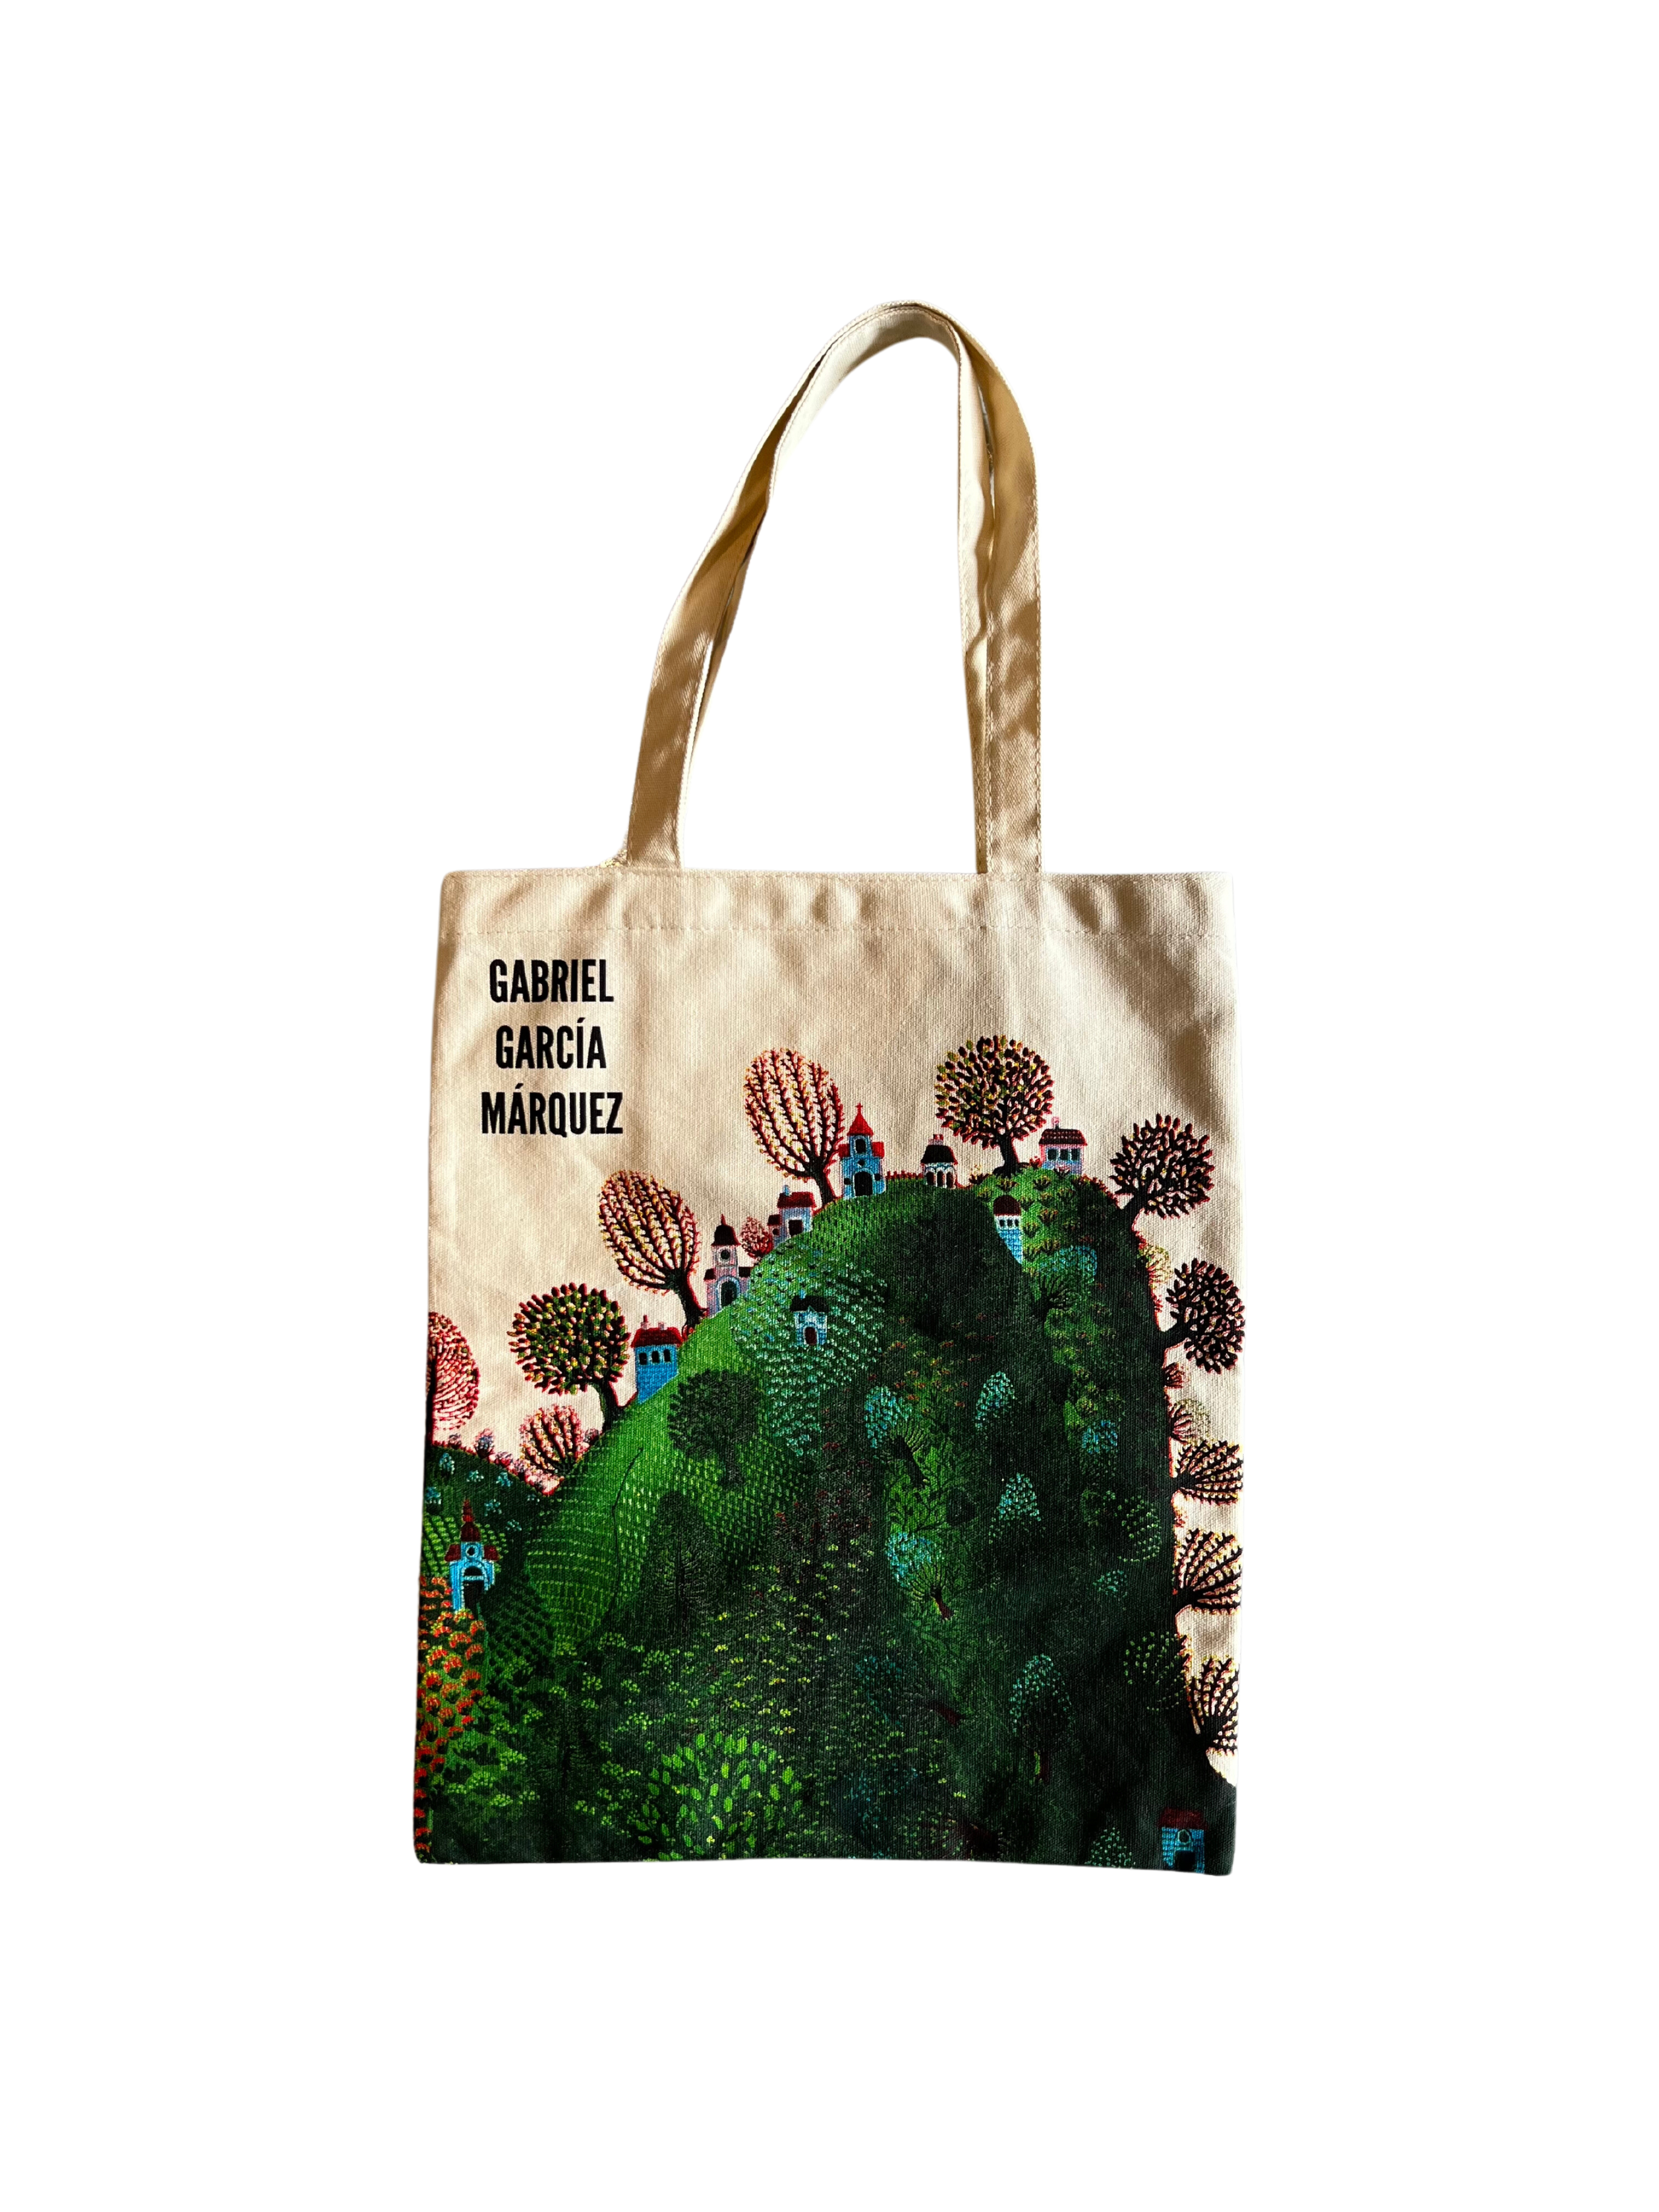 One Hundred Years of Solitude Literary Tote